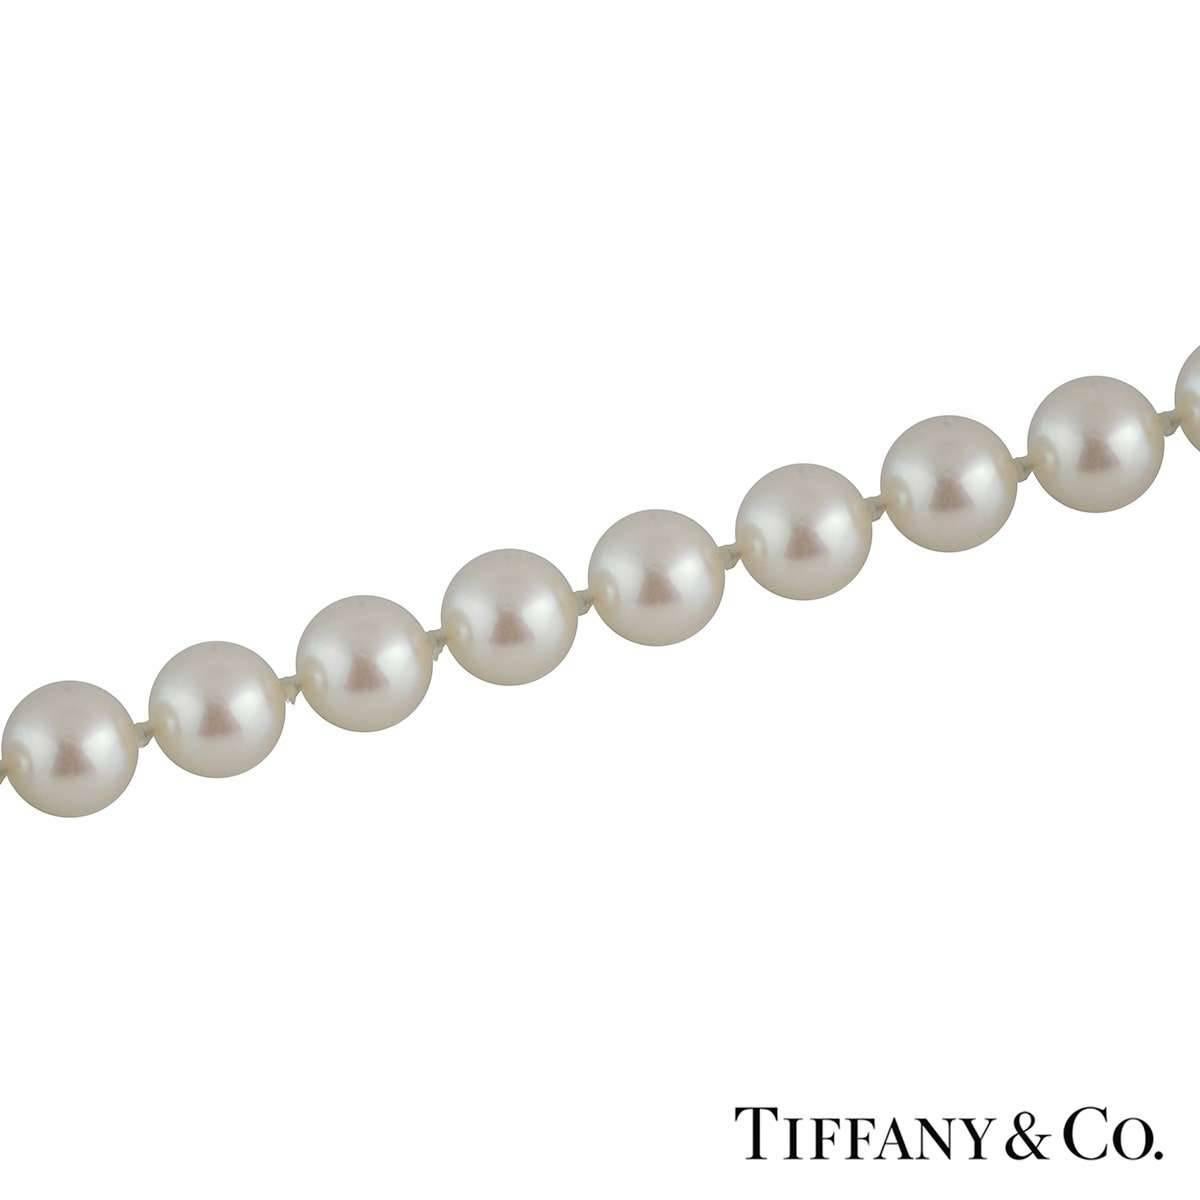 A timeless Tiffany & Co pearl necklace from the Tiffany Signature collection. The necklace features 56 individually knotted pearls each measuring 6.6-7mm with a box double-sided 'X' clasp in yellow gold. The necklace measures 16 inches in length and